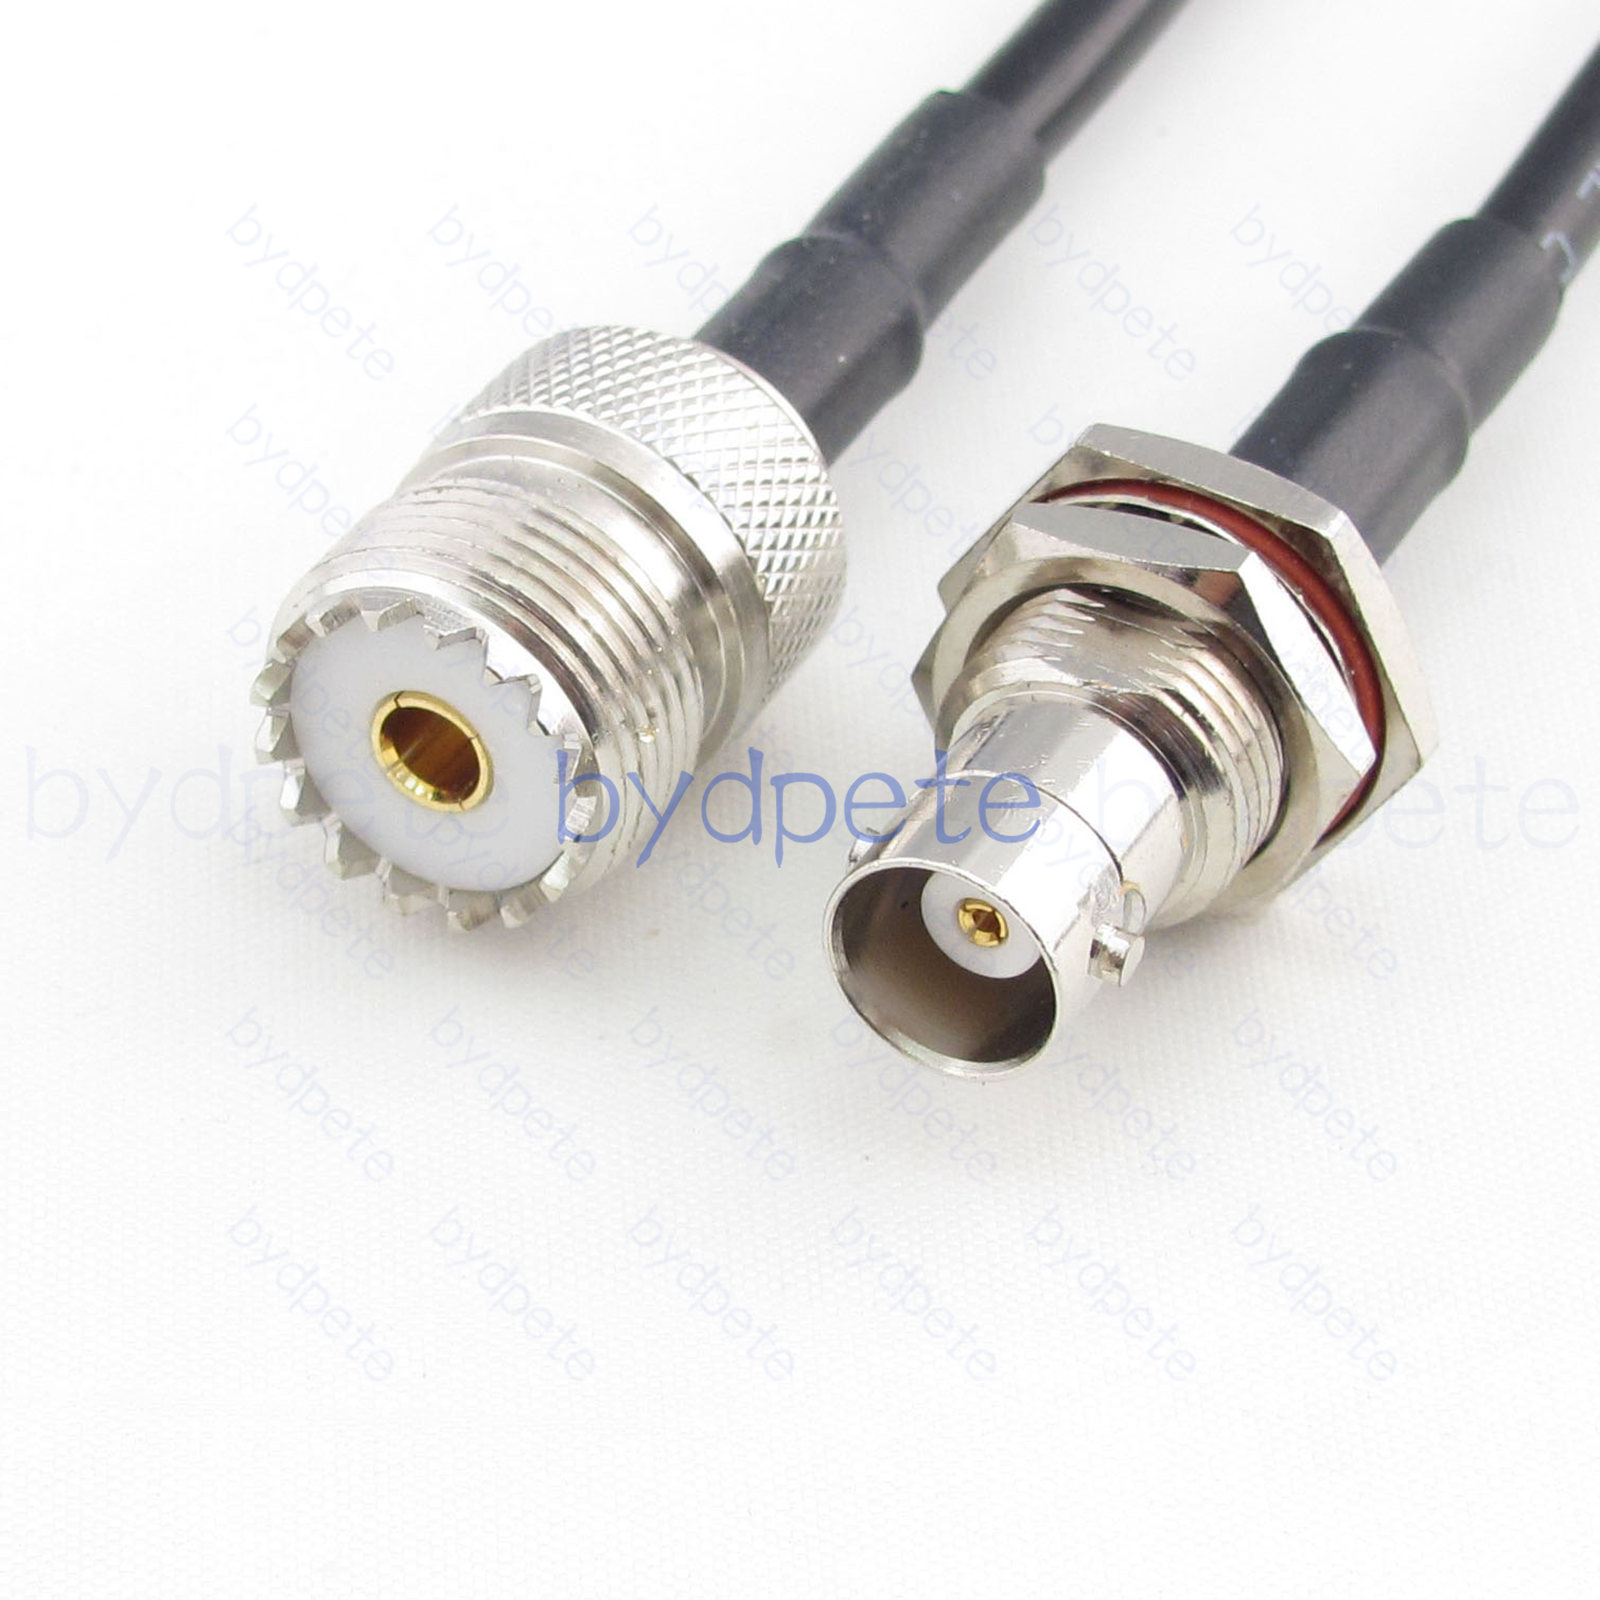 BNC Female Bulkhead Waterproof to UHF Female SO-239 RG58 Coaxial Cable 50ohms Coax Koaxial Kable bydpete BYDC075BNC58L1